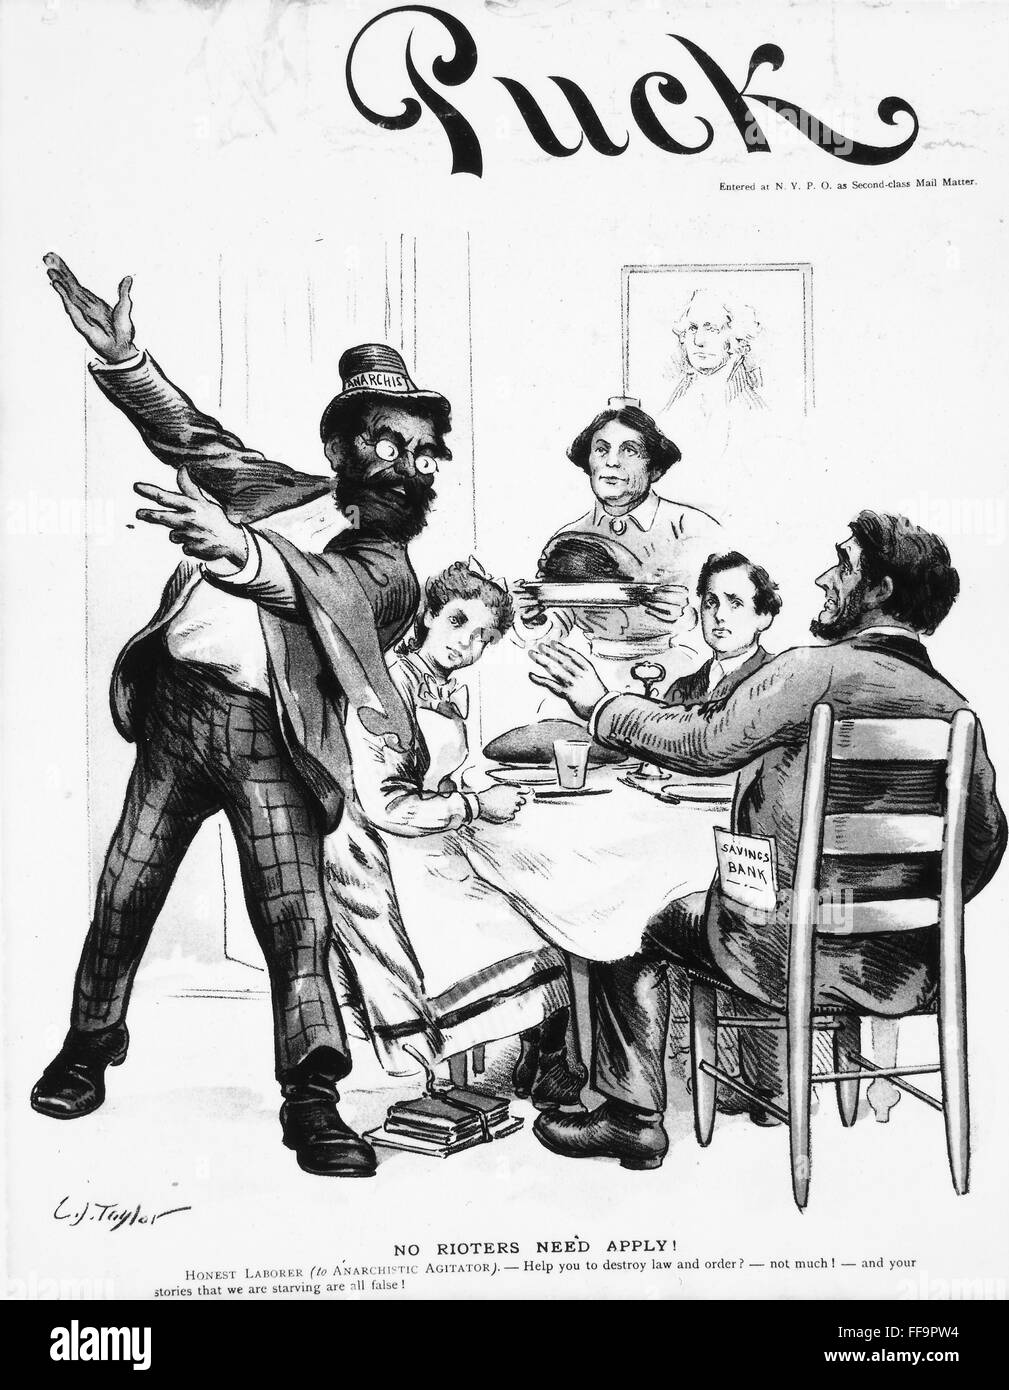 CARTOON: ANARCHIST, 1893. /n'No Rioters Need Apply!' 'Honest Laborer (to anarchistic agitator) - Help you to destroy law and order? - not much! - and your stories that we are starving are all false!' An American magazine cartoon of 1893 in which an honest Stock Photo